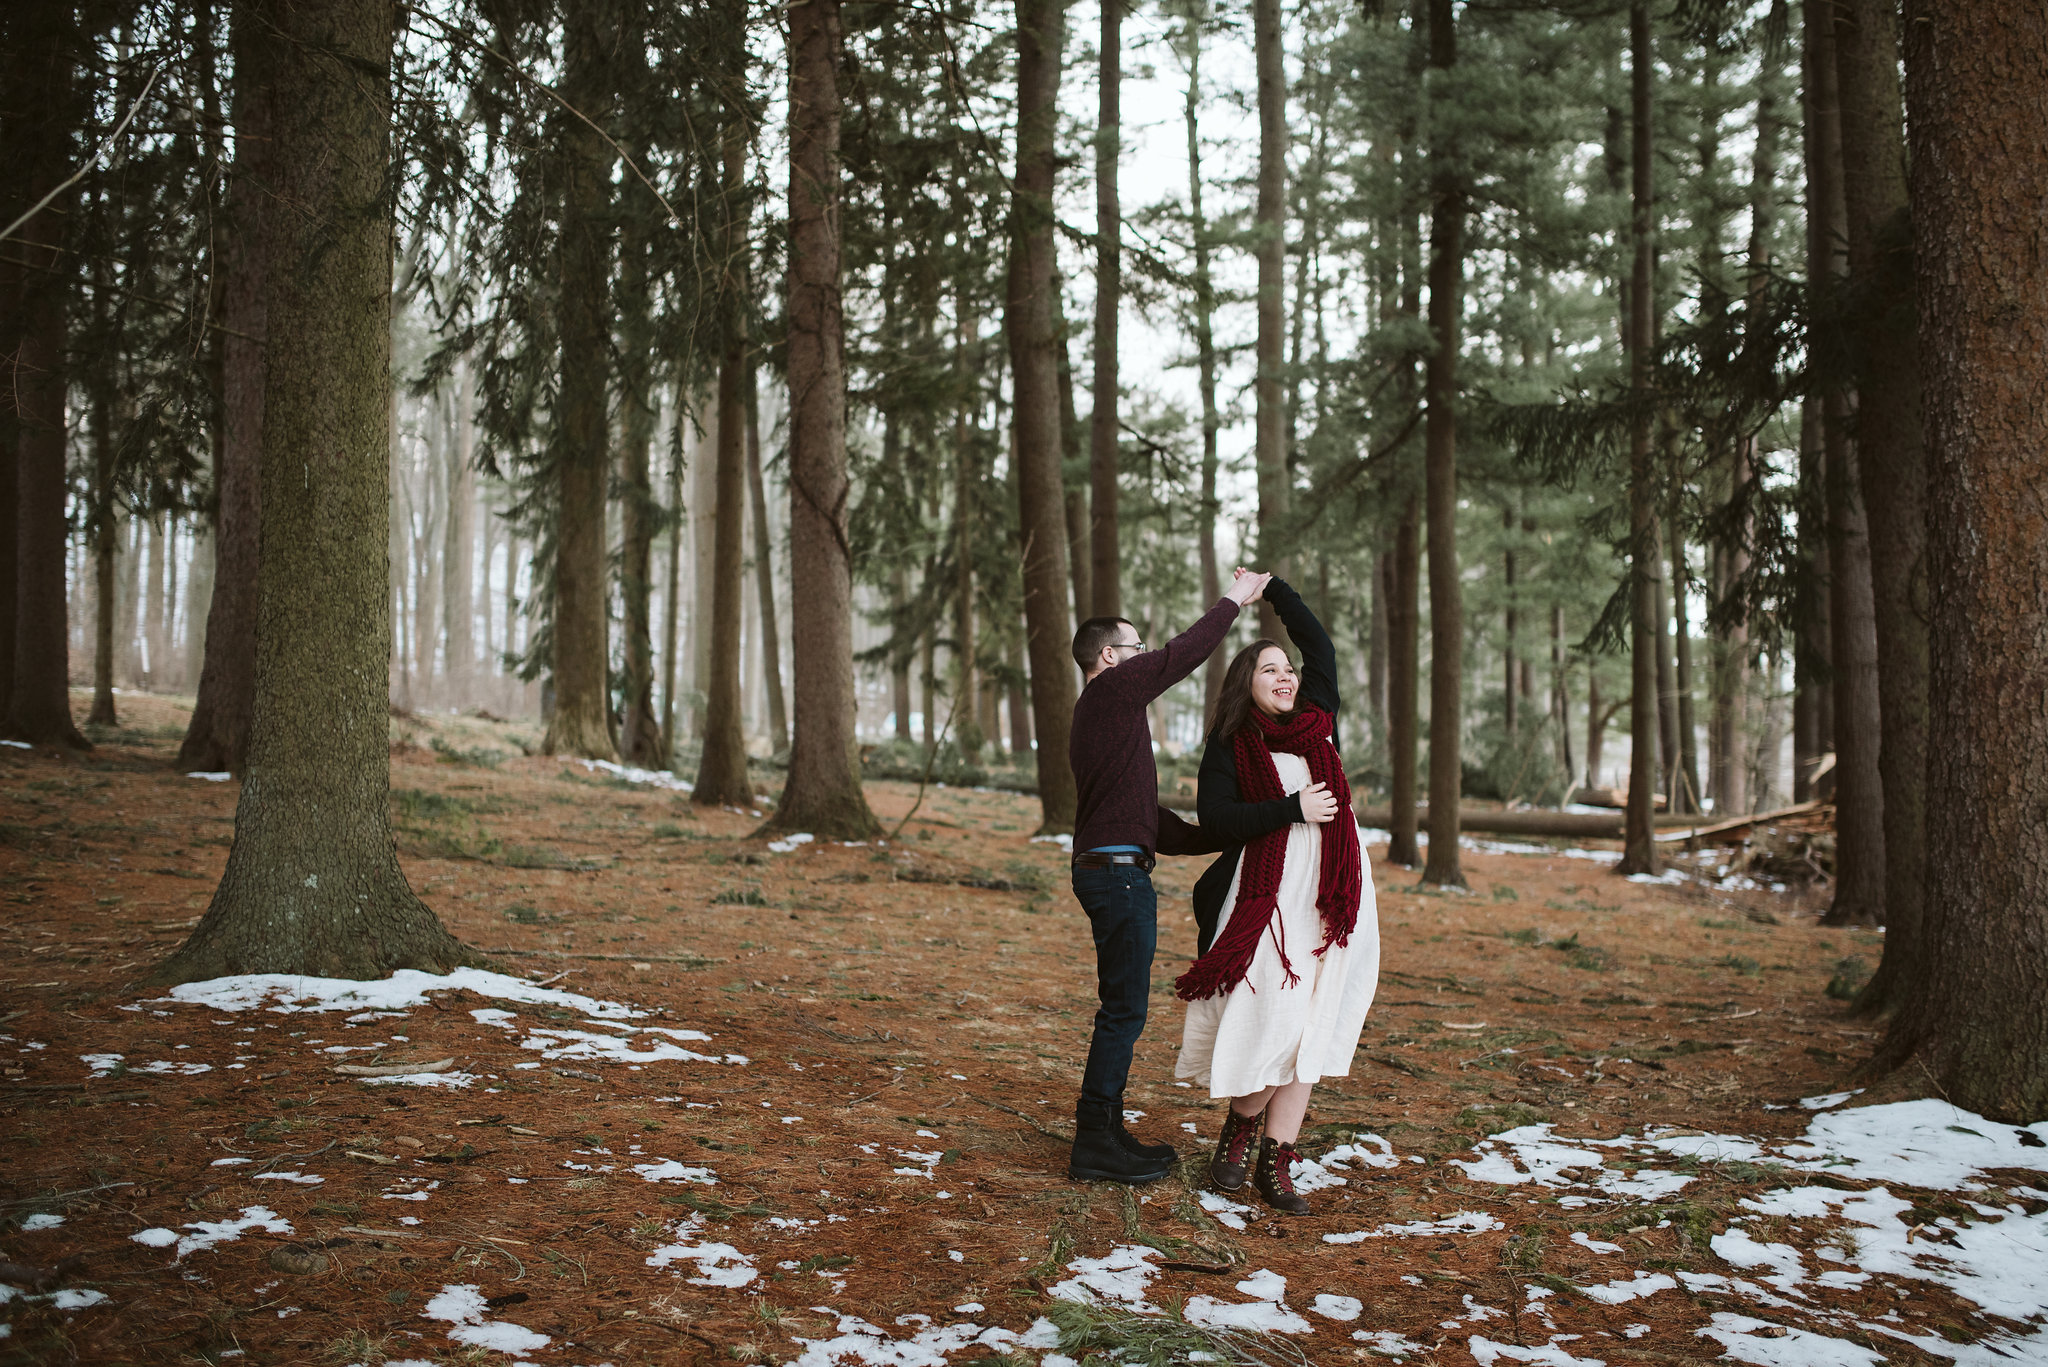  Baltimore County, Loch Raven Reservoir, Maryland Wedding Photographer, Winter, Engagement Photos, Nature, Romantic, Clean and Classic, Bride and Groom Dancing in Woods on Cold Spring Morning 